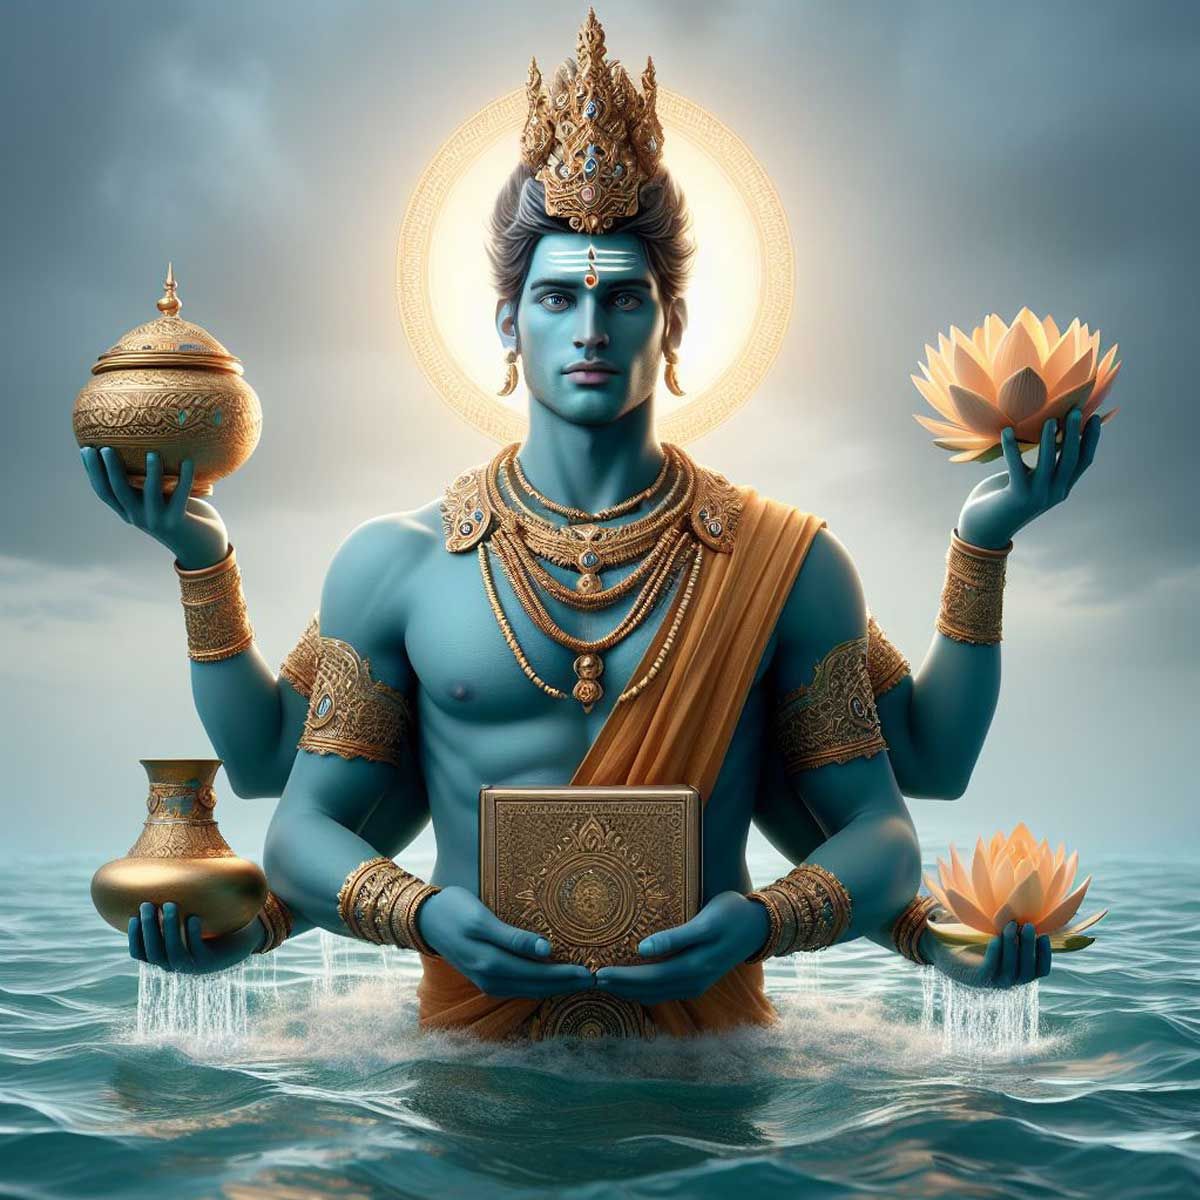 What's wrong with Dhanvantari symbol?? - The Indian Right-Wingers. - Quora